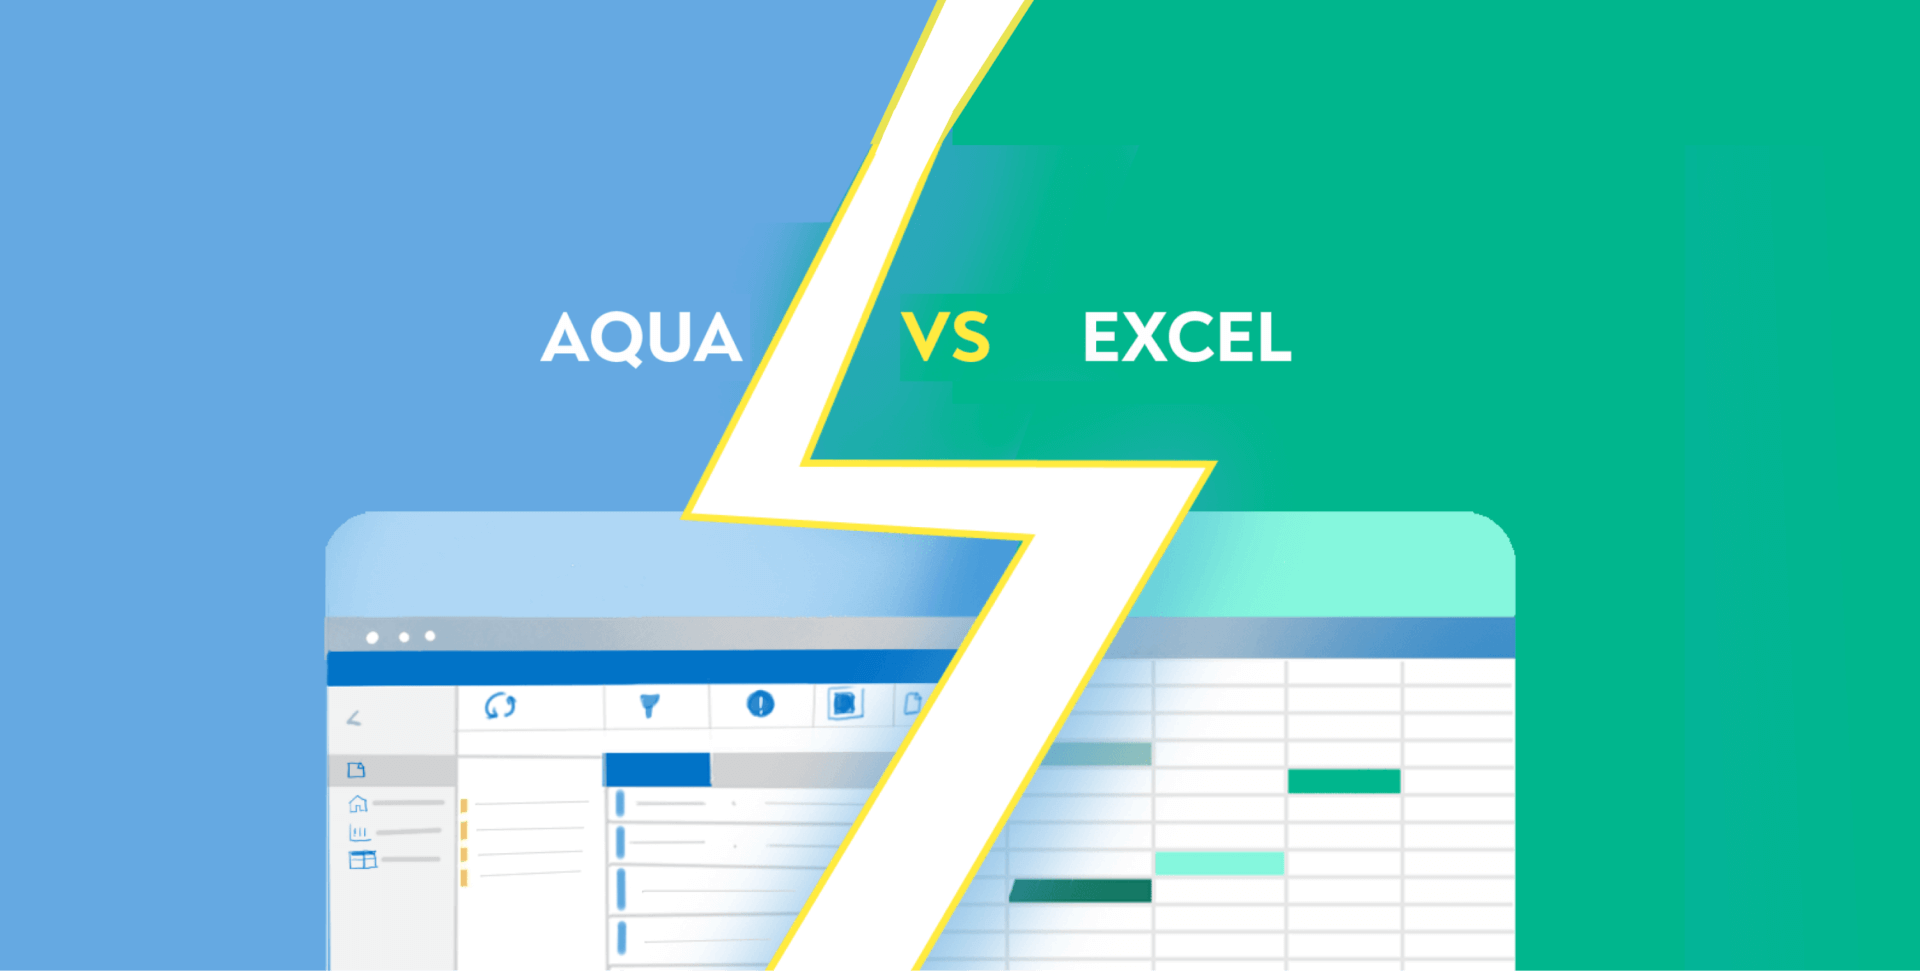 Why companies switch from Excel to aqua test management